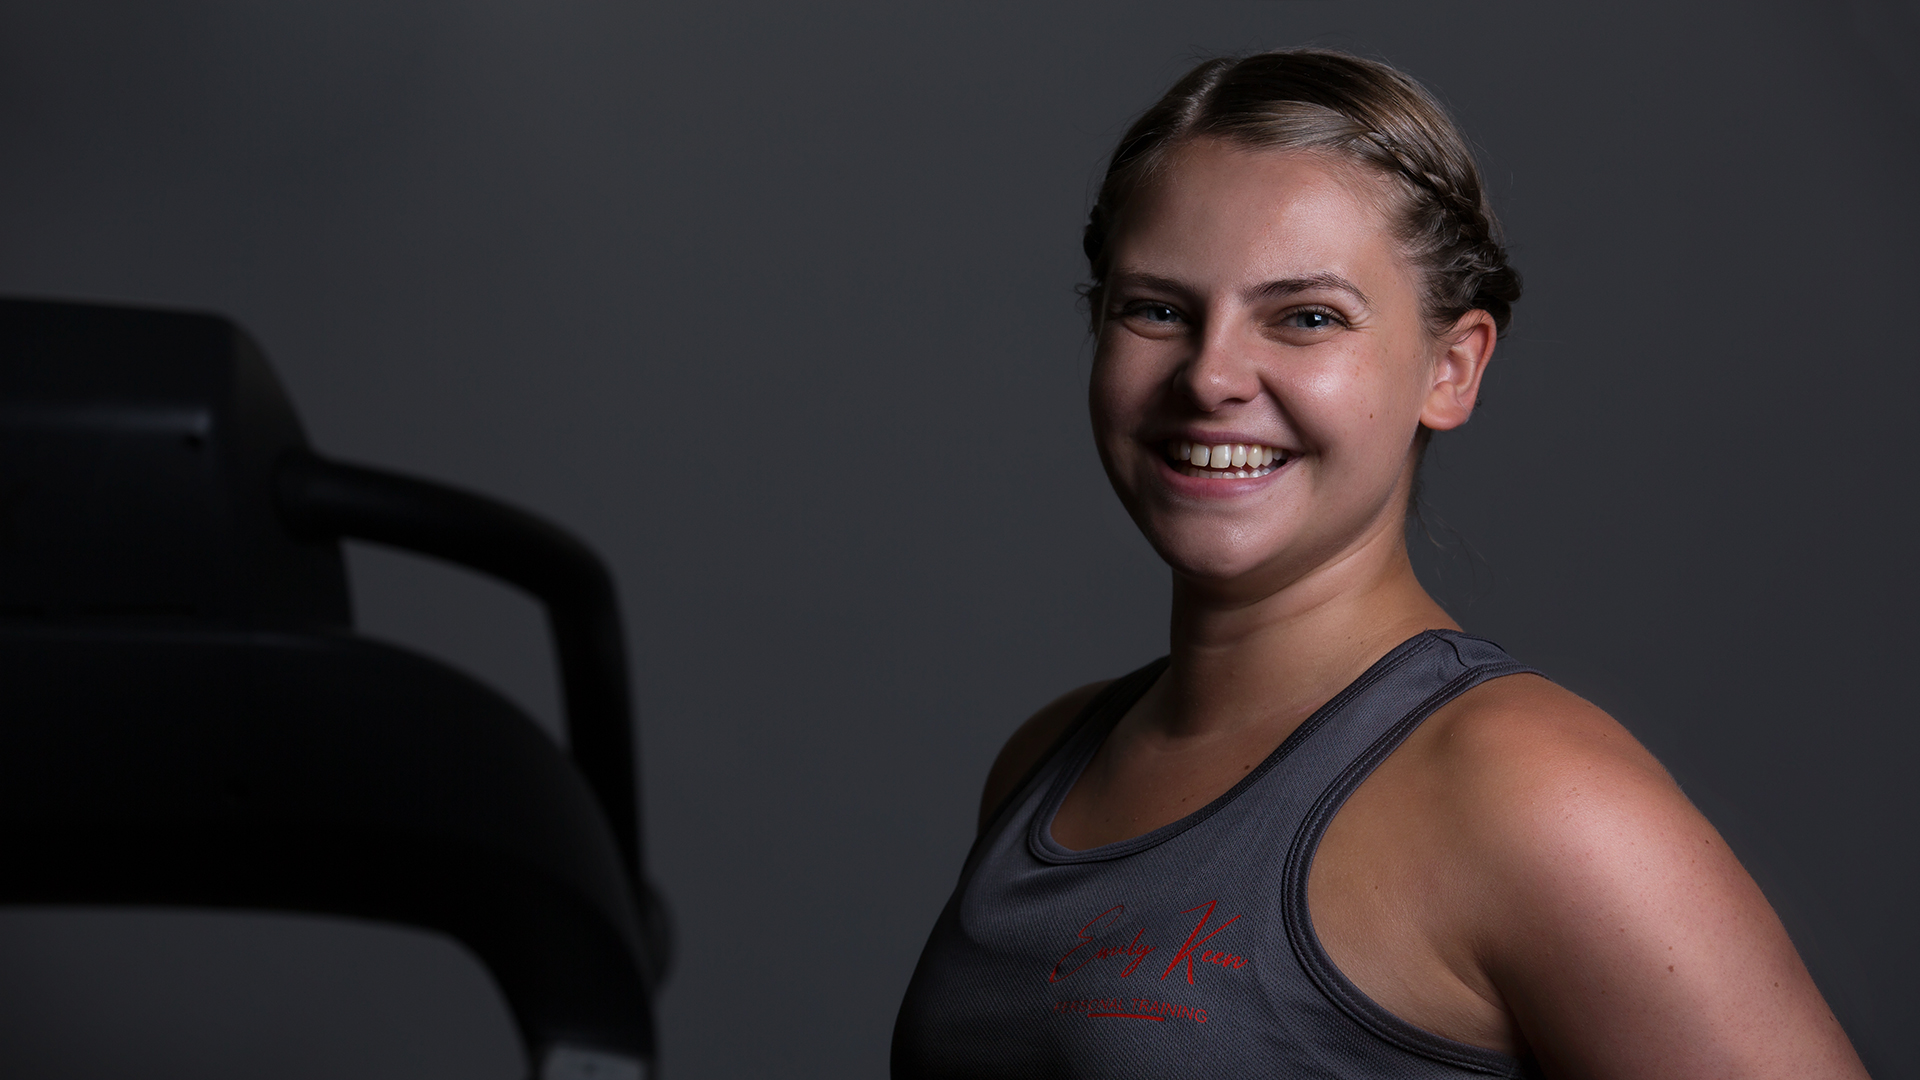 Emily Keen Personal Training - Based in Plymouth